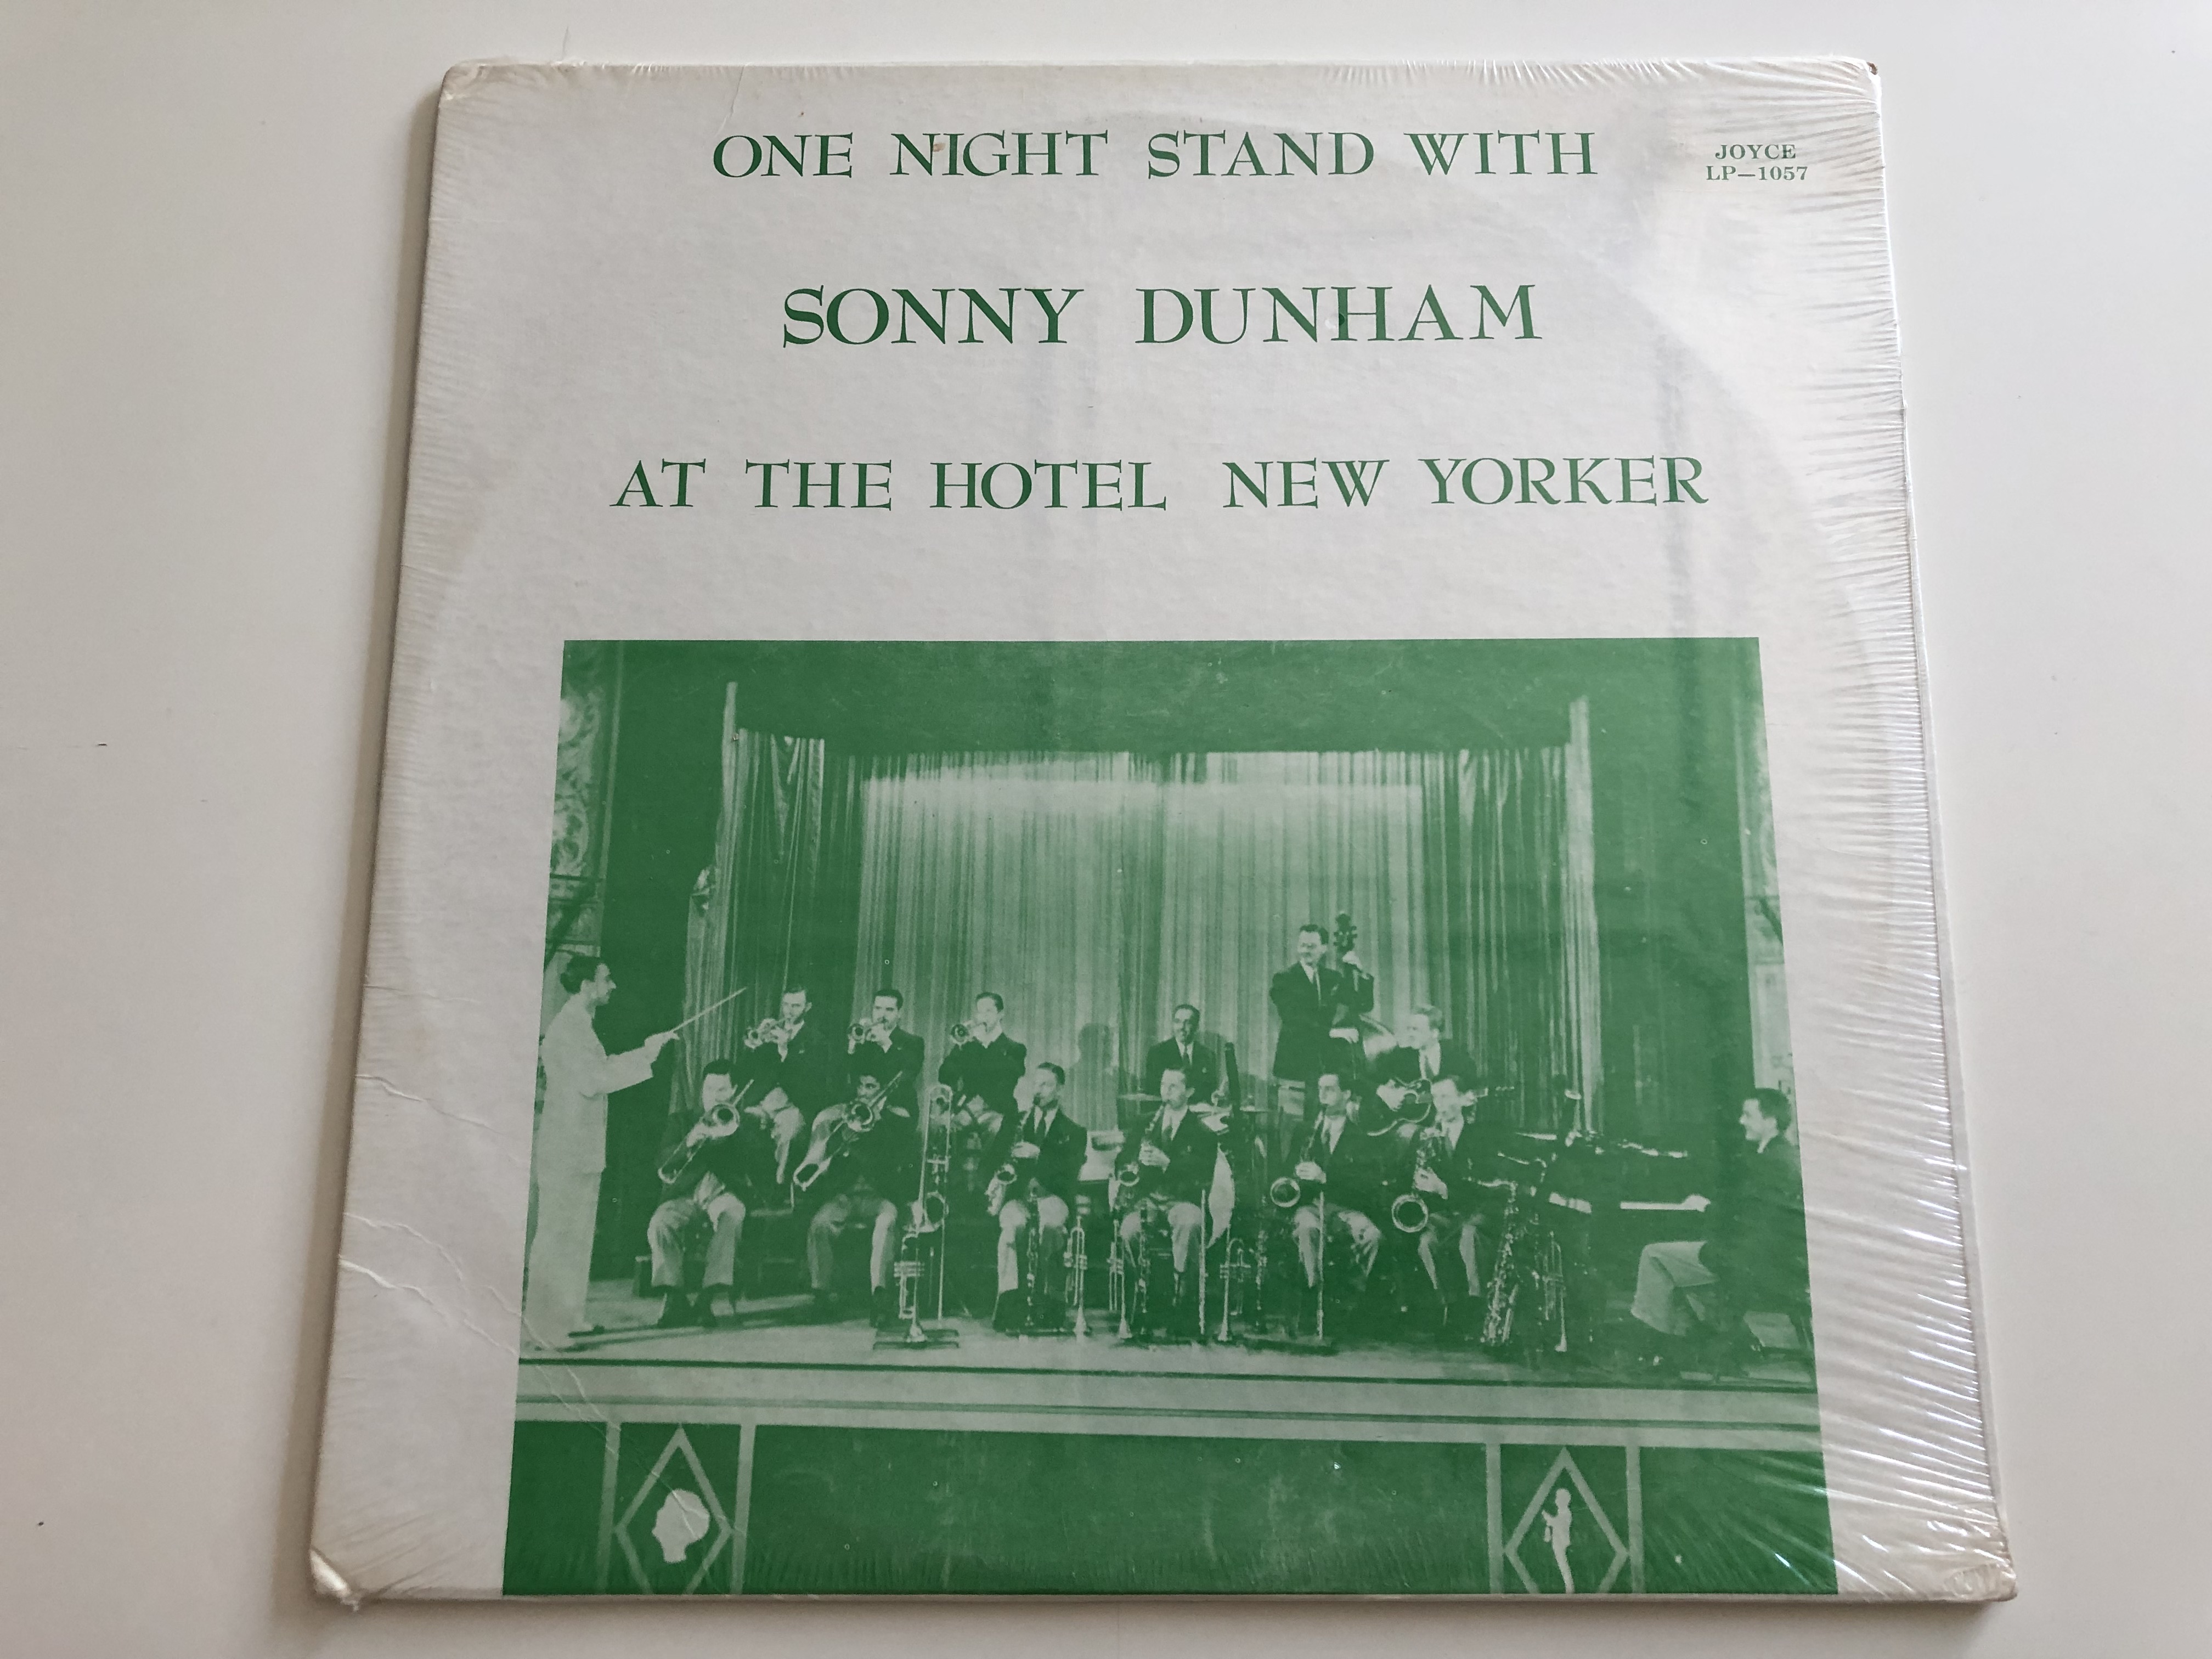 one-night-stand-with-sonny-dunham-at-the-hotel-new-yorker-joyce-lp-1057-1-.jpg